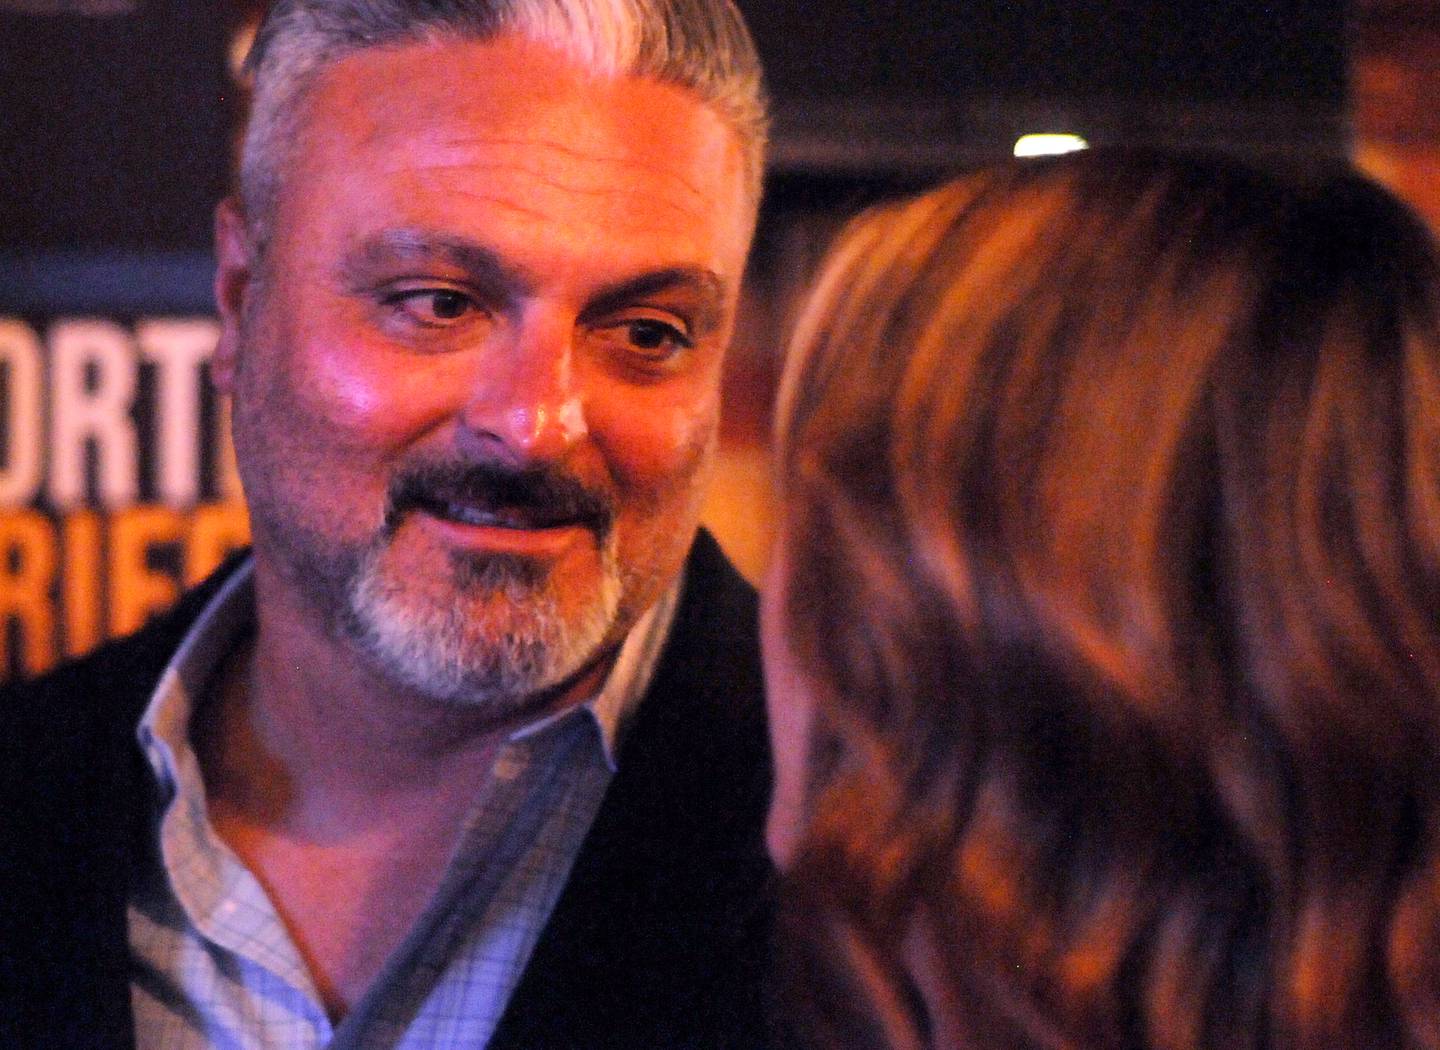 Tony Colatorti talks with his wife, Brittany, during his primary election night watch party Tuesday June 28, 2022, at Cucina Bella, 220 S. Main St. in Algonquin. Colatorti, who owns Cucina Bella, was one of two Republican candidates running to become McHenry County’s next sheriff.